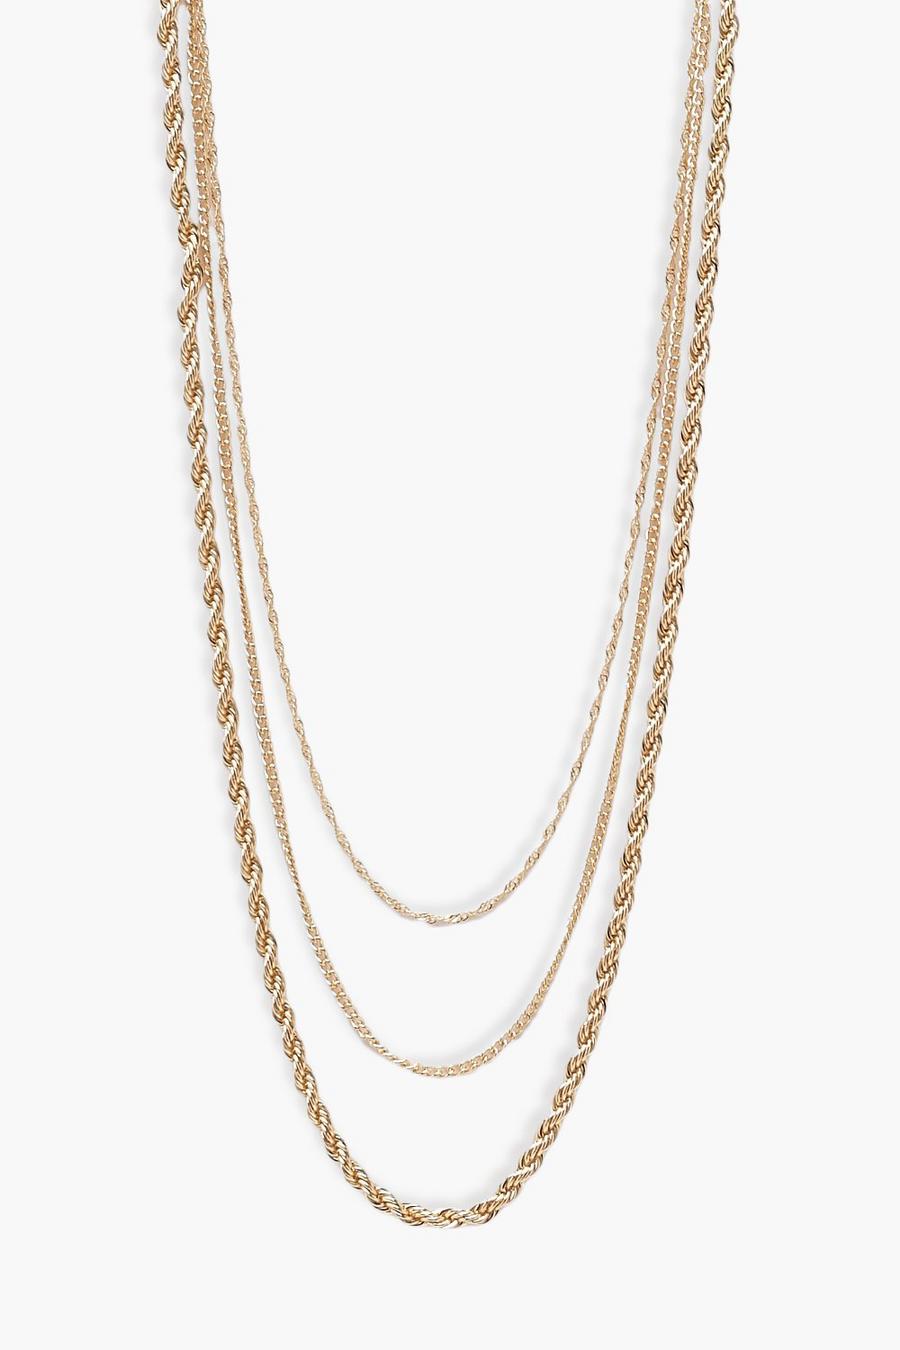 Gold Triple Rope Twist Chain Necklaces 